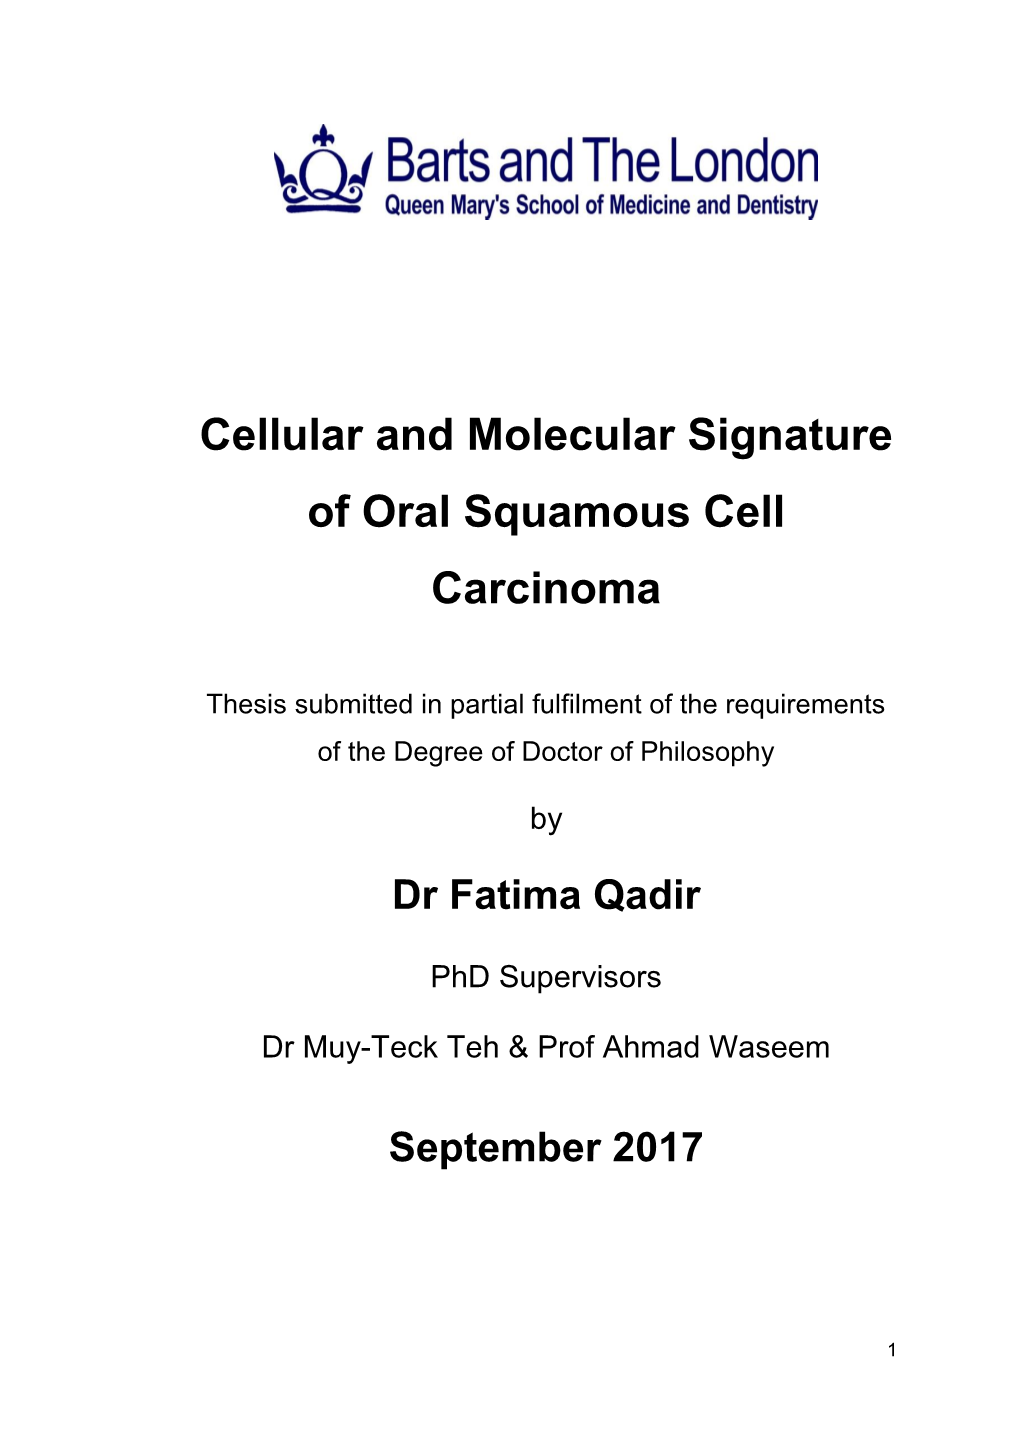 Cellular and Molecular Signature of Oral Squamous Cell Carcinoma